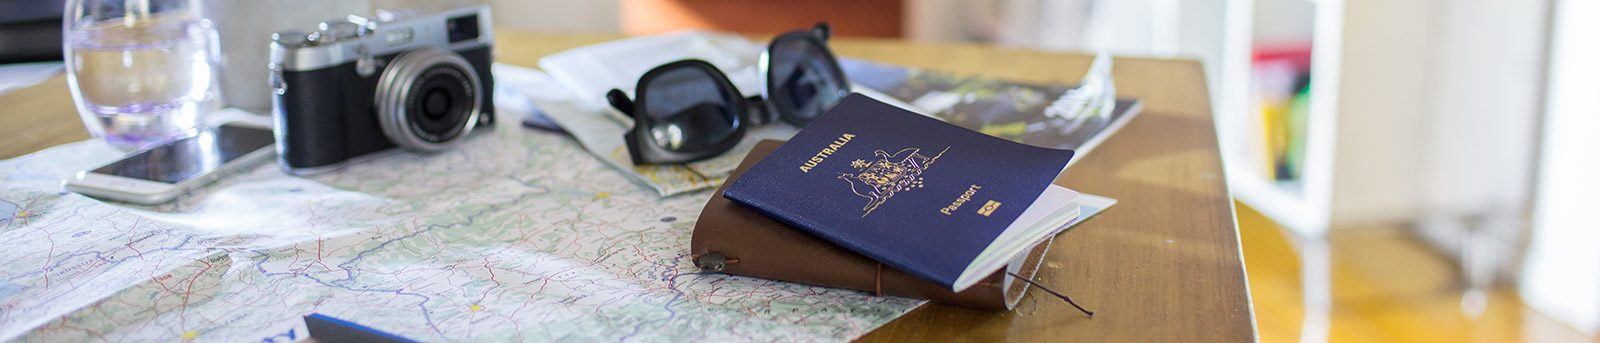 Table with camera, sunglasses and passport scattered on top